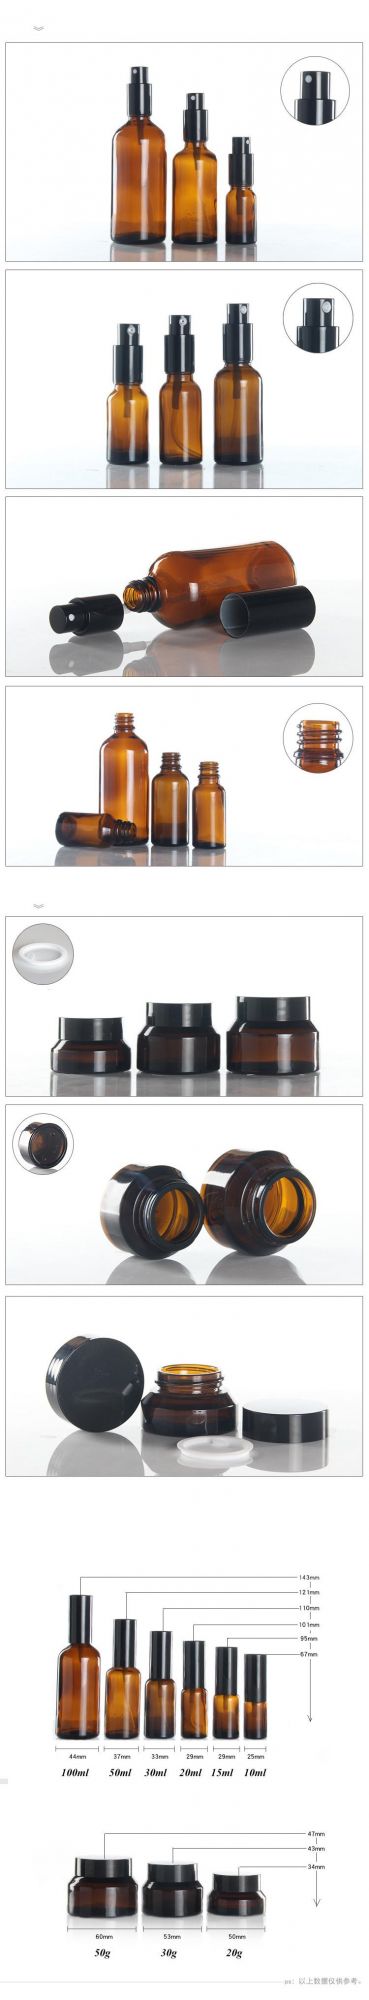 10ml 15ml 20ml 30ml 50ml 100ml Amber Lotion and Spray Cosmetic Bottle for Skin Care